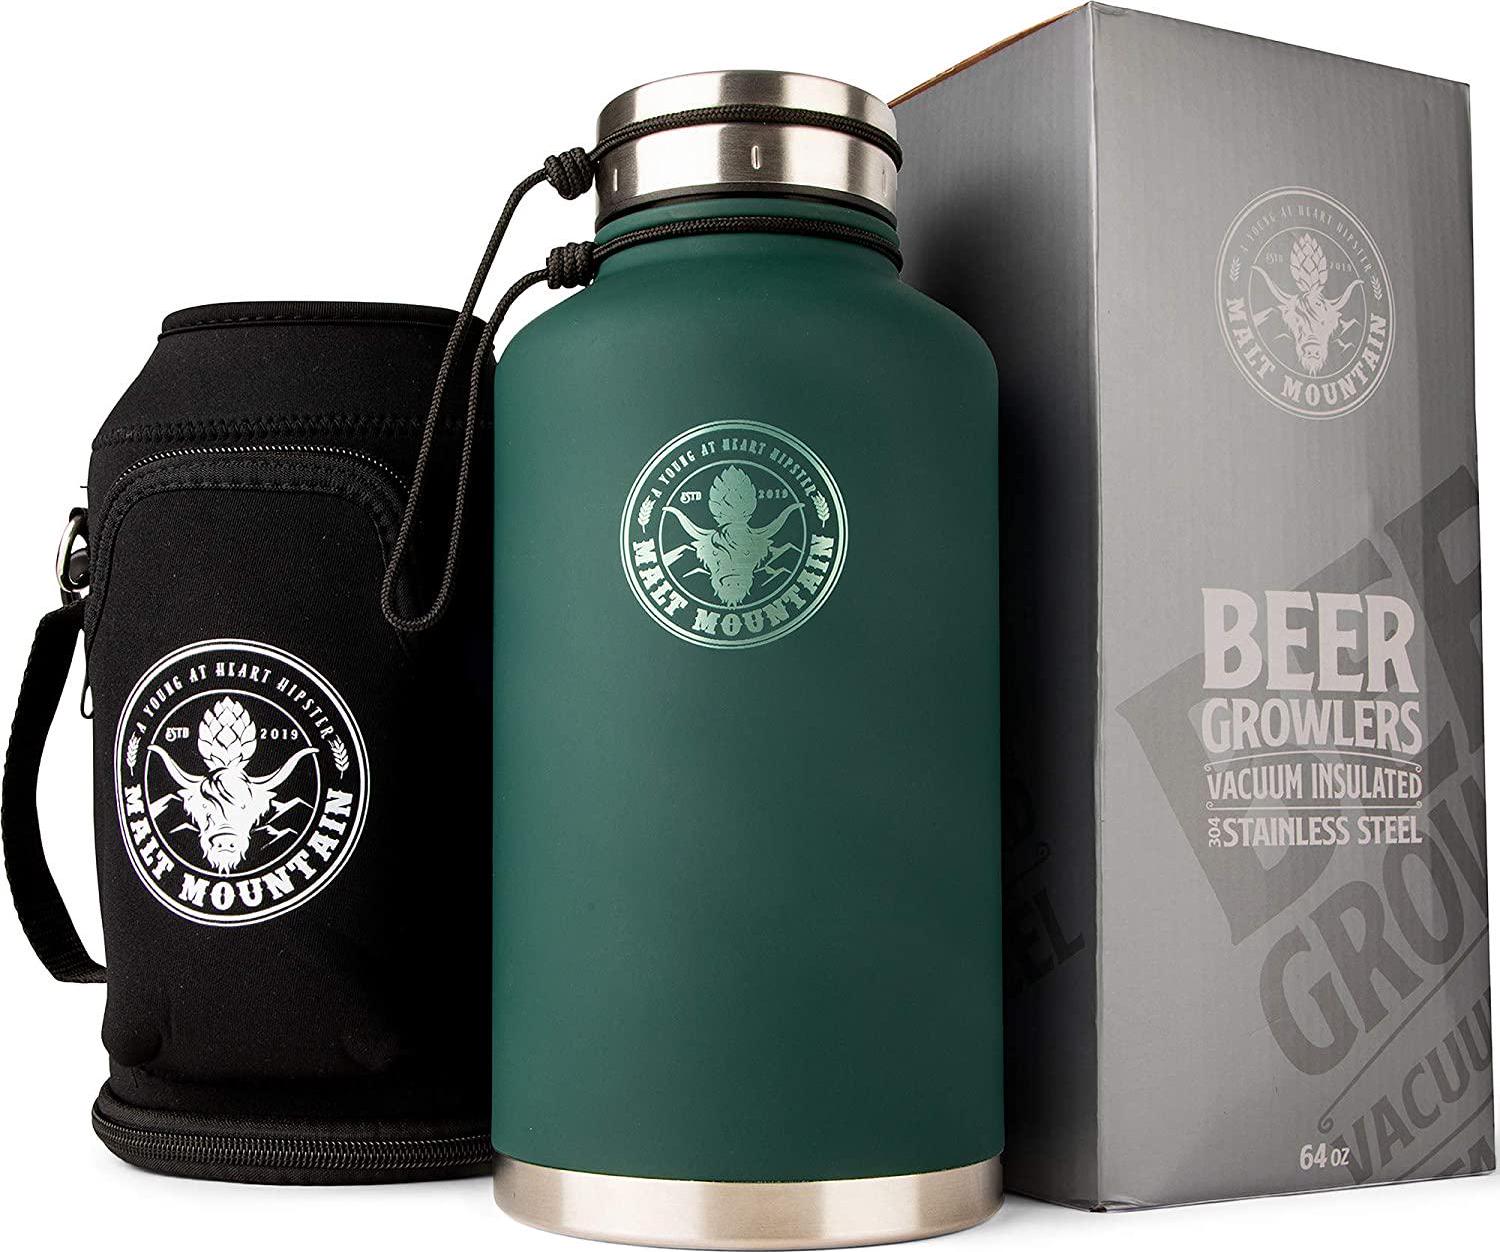 Malt Mountain, Malt Mountain Insulated Beer Growler, 64 oz, Double-Wall Stainless Steel, with Travel Bag - Vacuum Sealed Growlers for Cold Beer - 48 Hour Temperature and Carbonation - Drink Canister Jugs for Camping